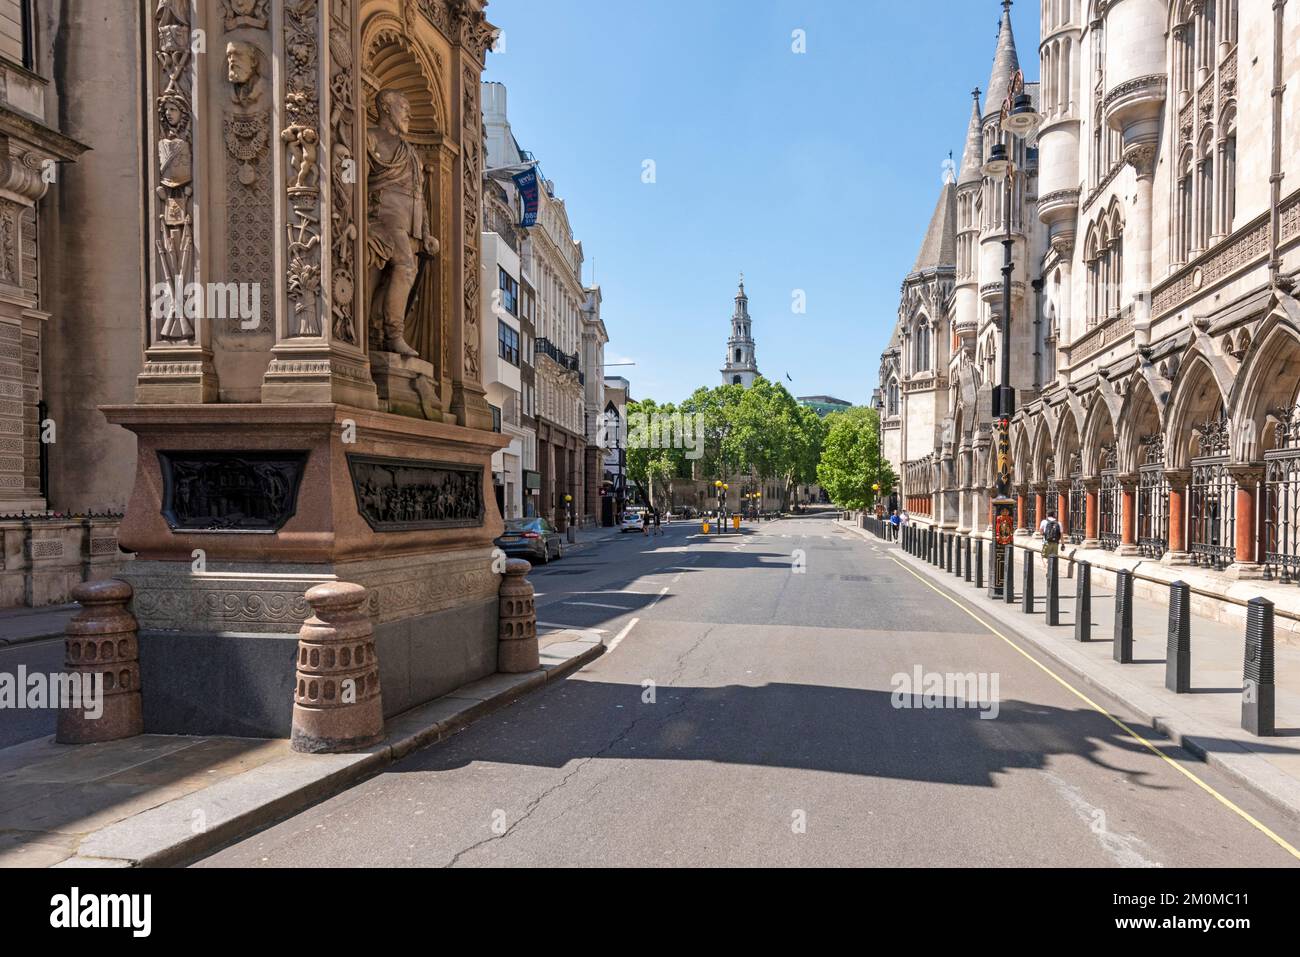 A shot looking West along the Strand, Temple Bar Memorial, The Royal Courts of Justice and St Clement Danes Church all in shot. Taken during Lockdown . Stock Photo